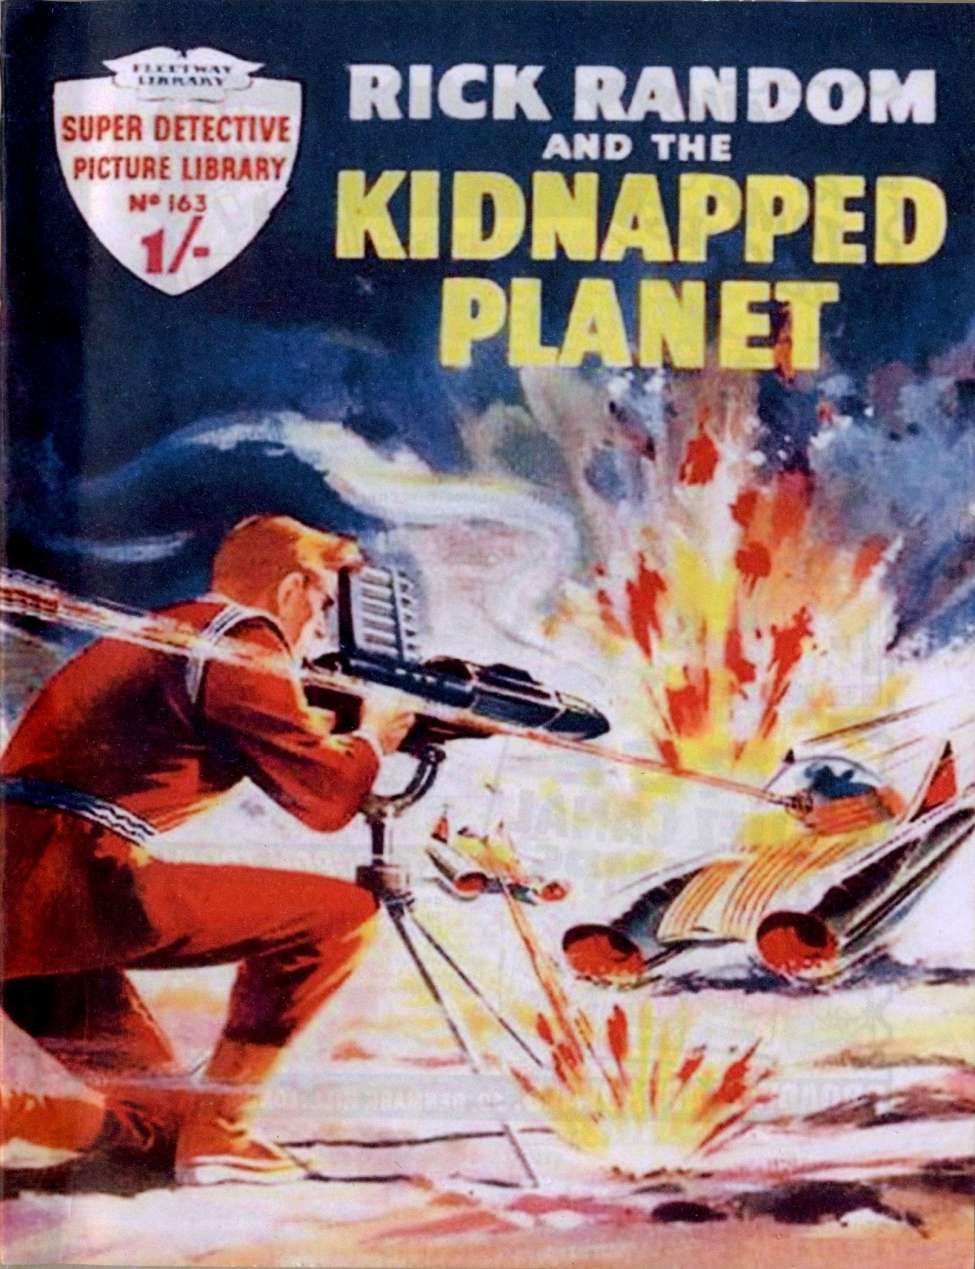 Book Cover For Super Detective Library 163 - Rick Random and the Kidnapped Planet